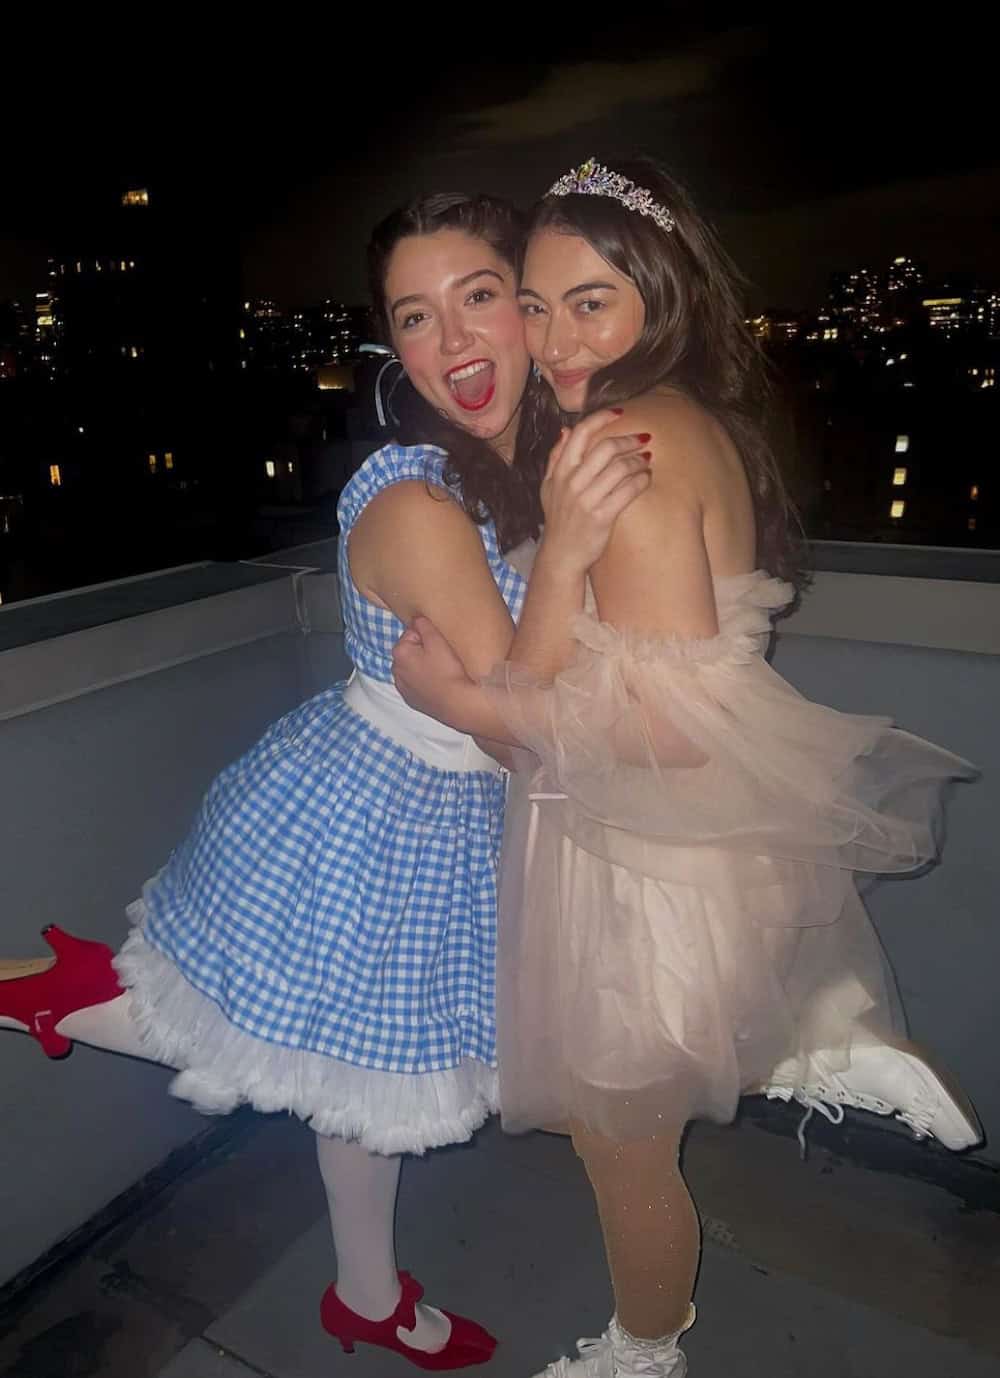 Two women dressed up as Dorothy and Glenda the Good Witch from The Wizard of Oz on Halloween.